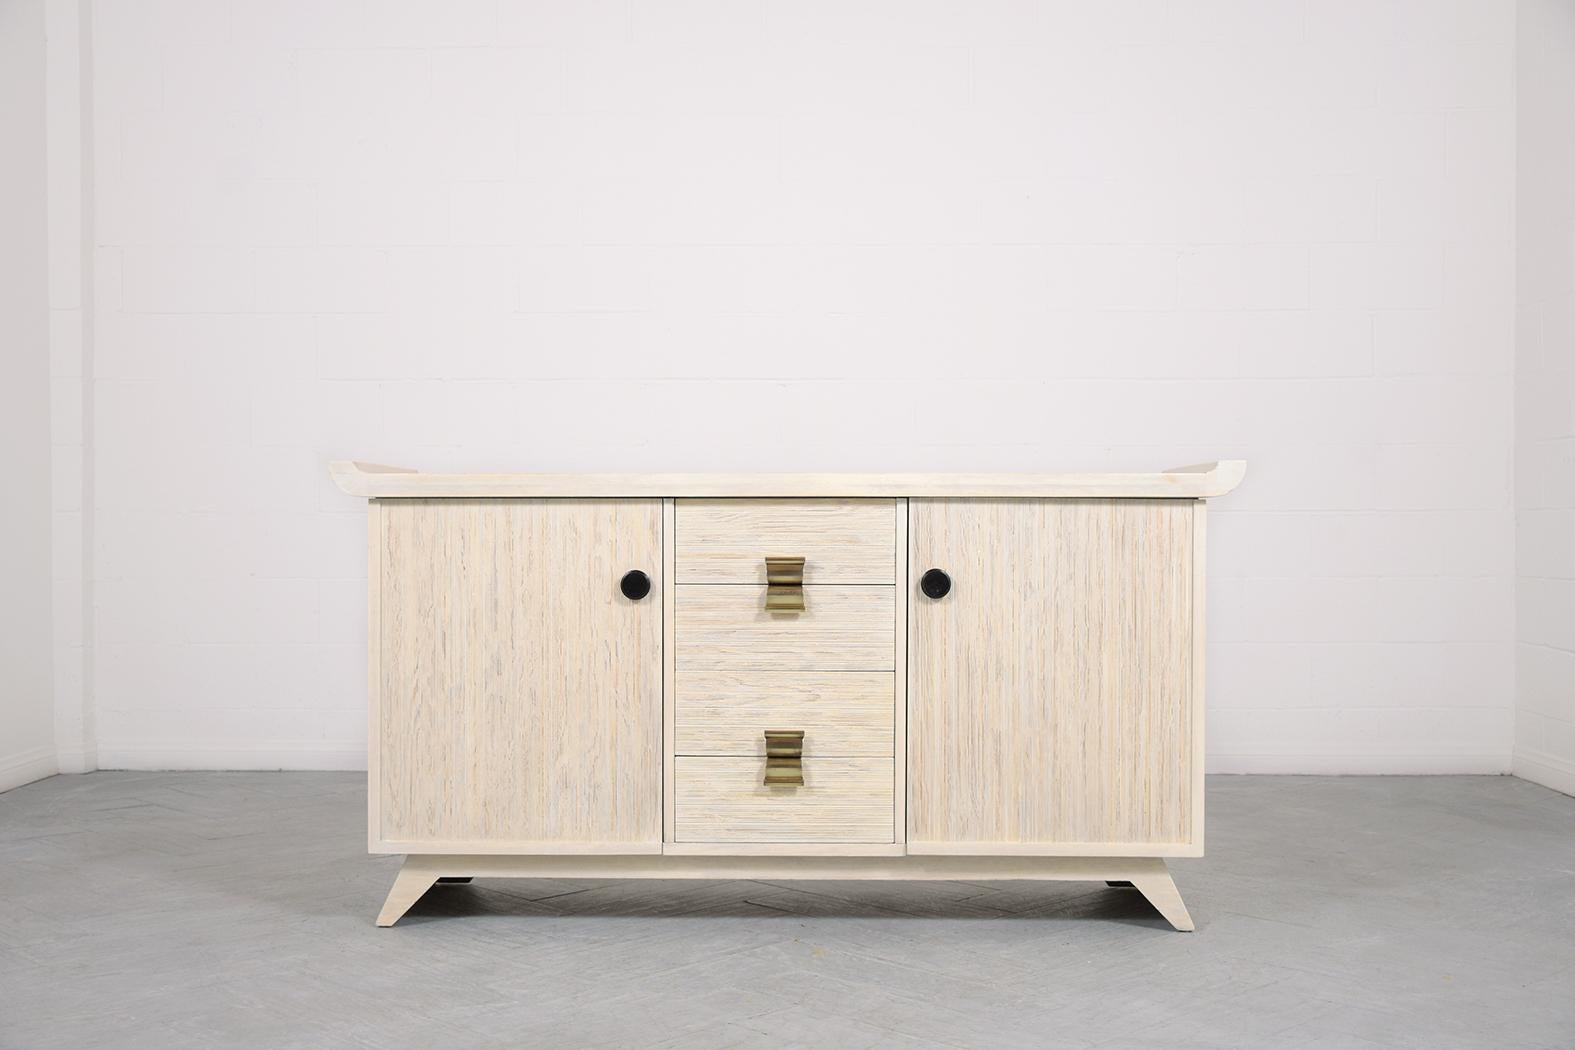 Introducing our striking 1960s white-washed server, masterfully hand-crafted from oak wood and meticulously restored to perfection by our seasoned craftsmen. The mid-century allure of this cabinet is undeniable with its chic white-washed hue, sealed